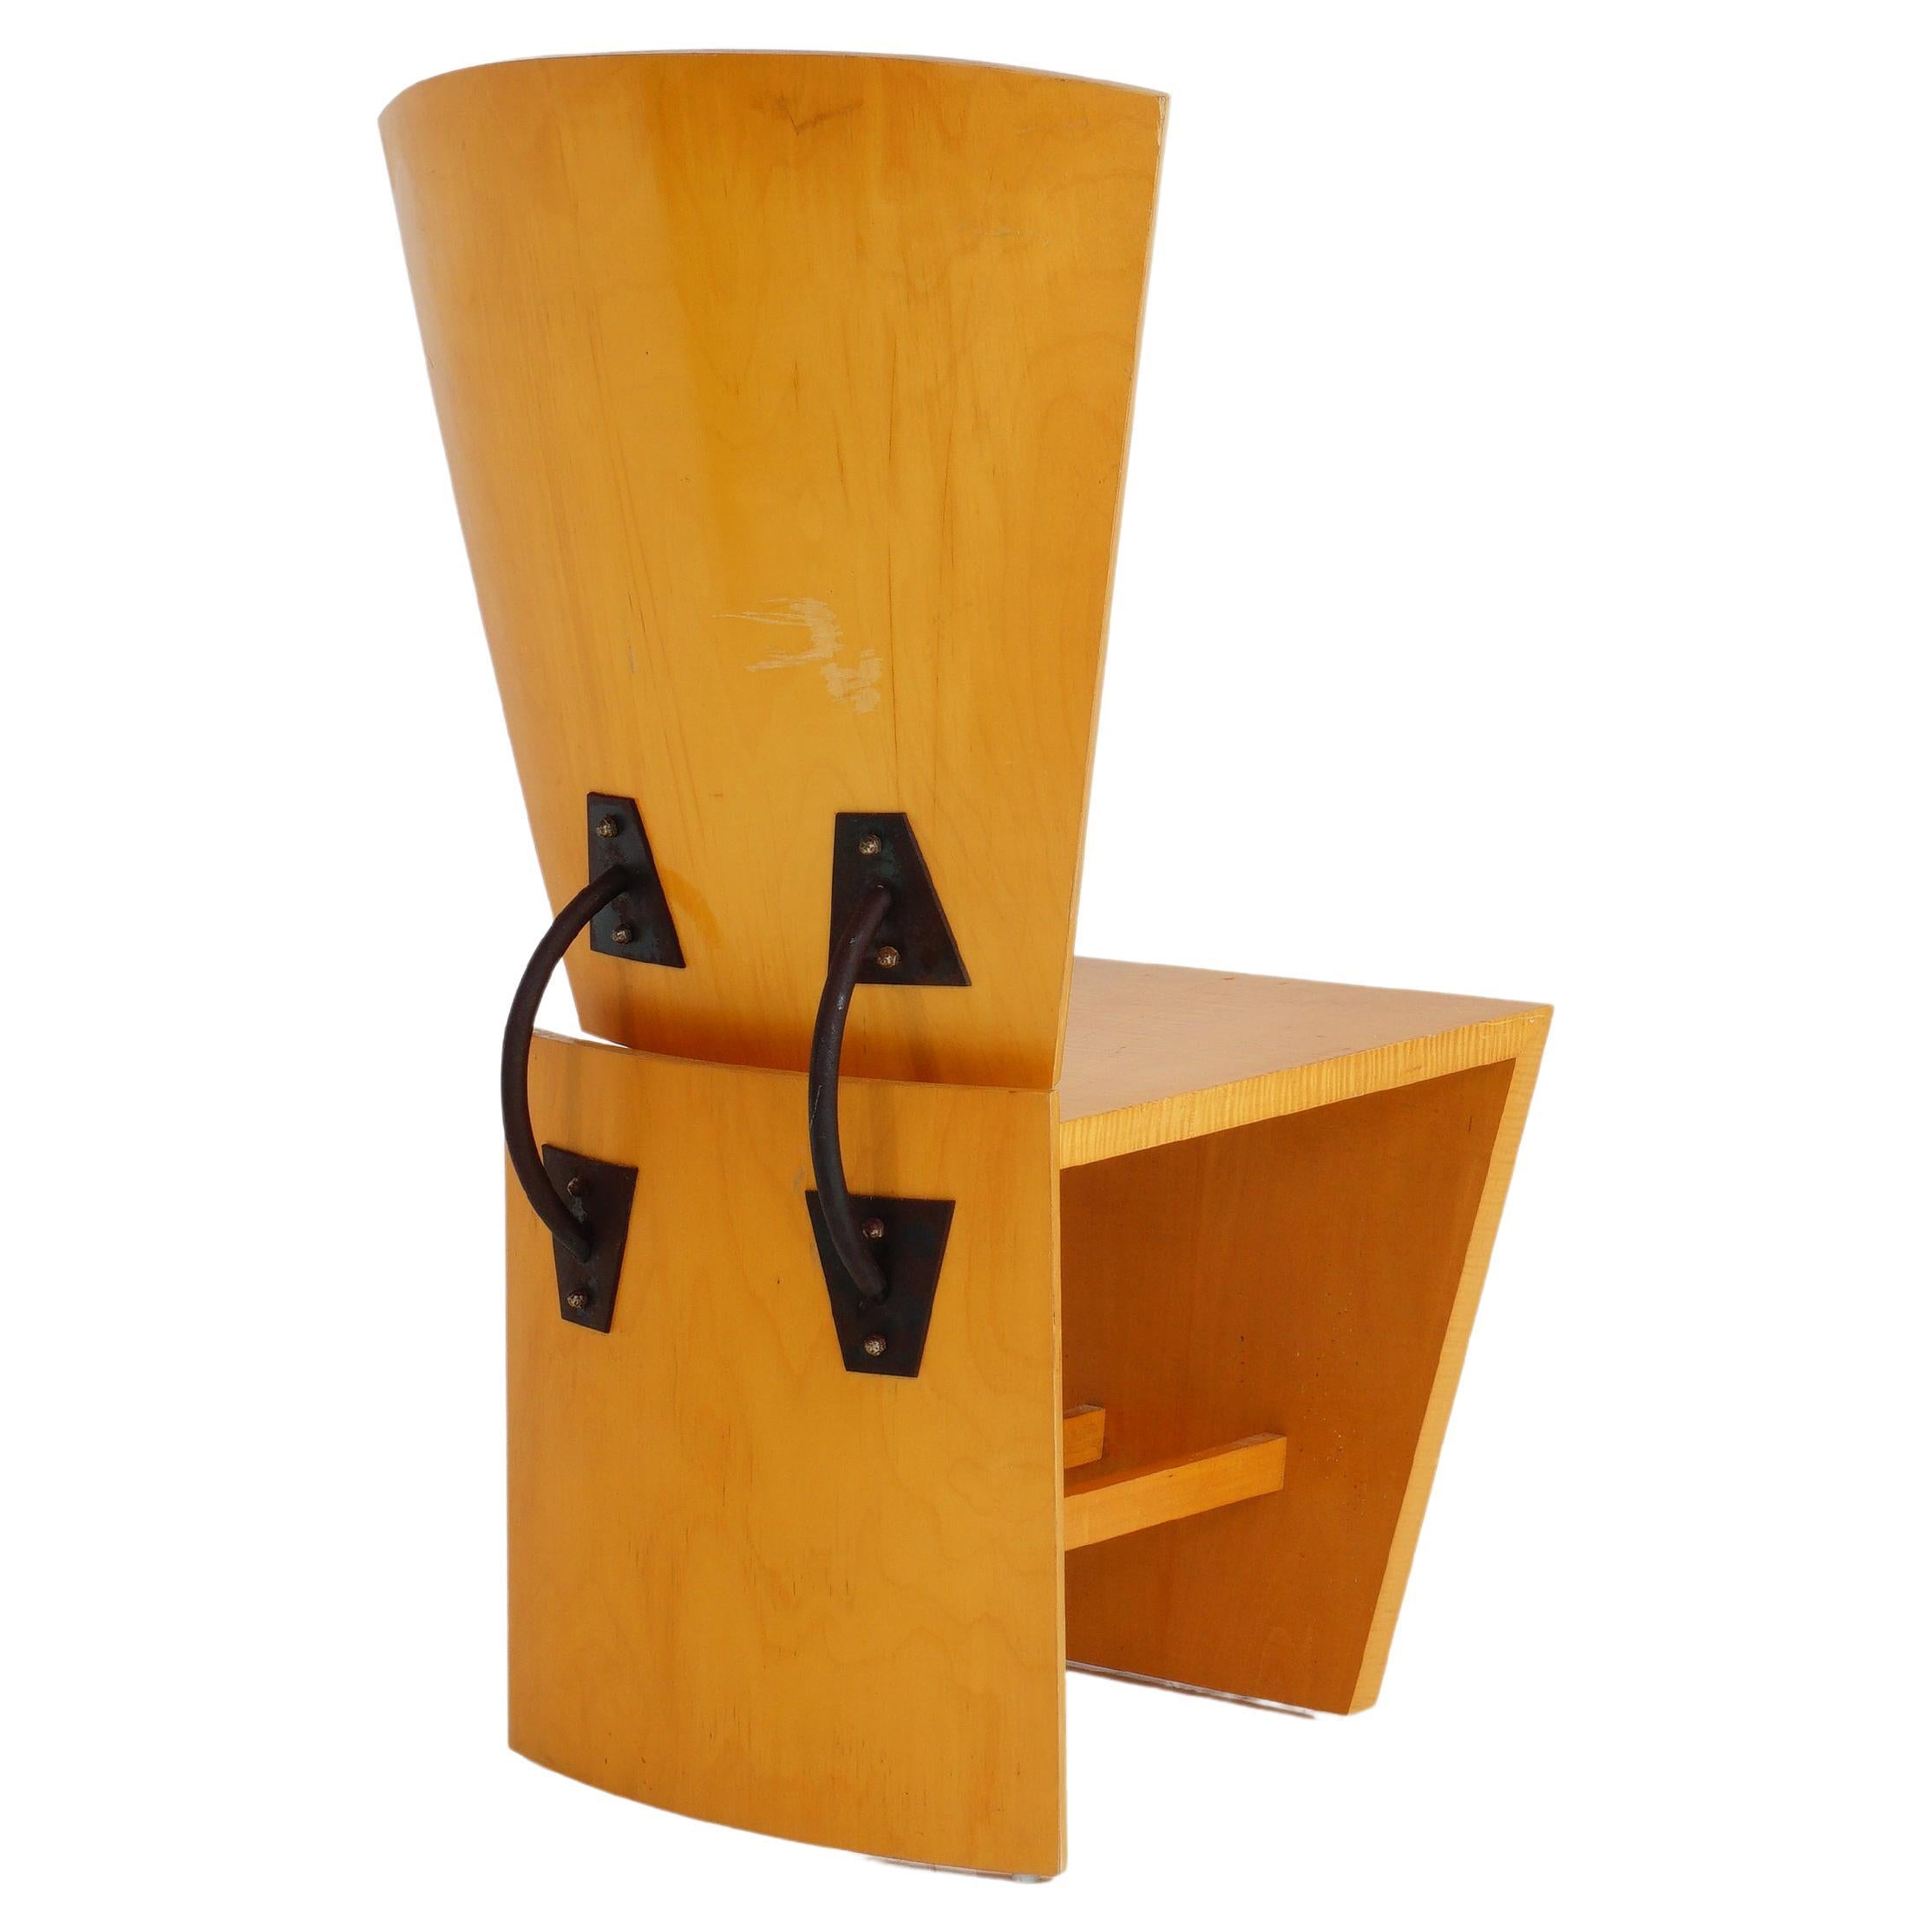 Sculptural Chair by Todd Wolfe, 1991 For Sale